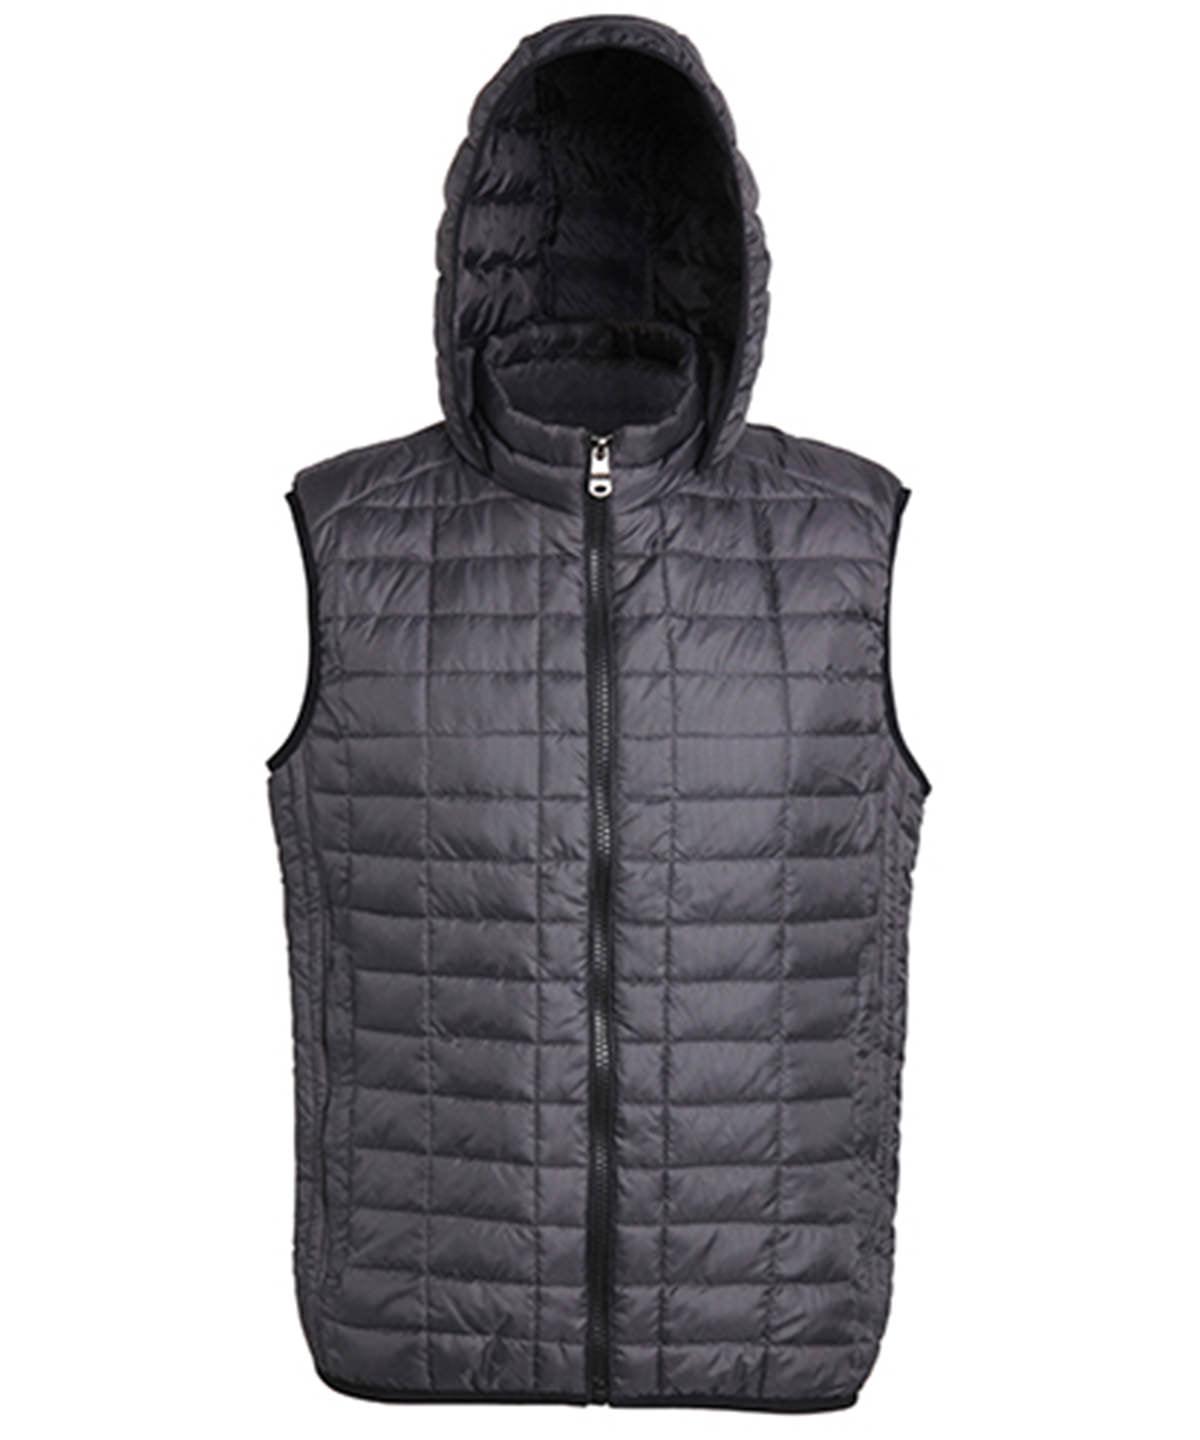 Black - Honeycomb hooded gilet Body Warmers 2786 Gilets and Bodywarmers, Jackets & Coats, Outdoor Dining, Padded & Insulation, Padded Perfection, Plus Sizes, Raladeal - Recently Added, Rebrandable Schoolwear Centres